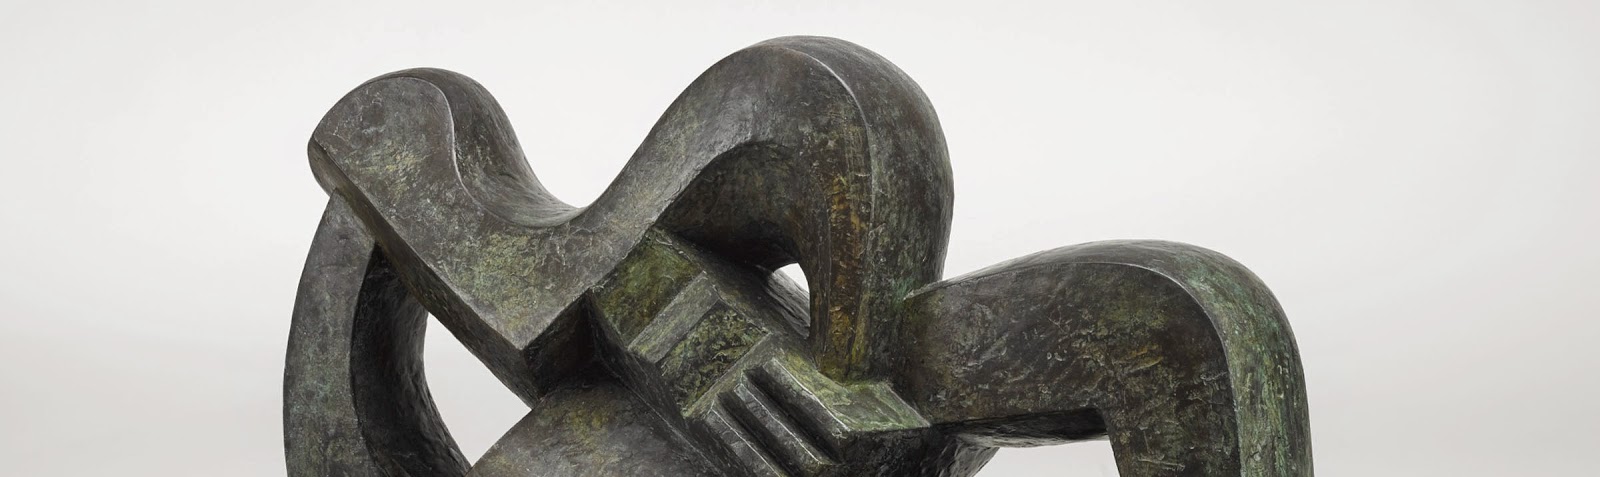 Jacques Lipchitz's Woman with a Guitar